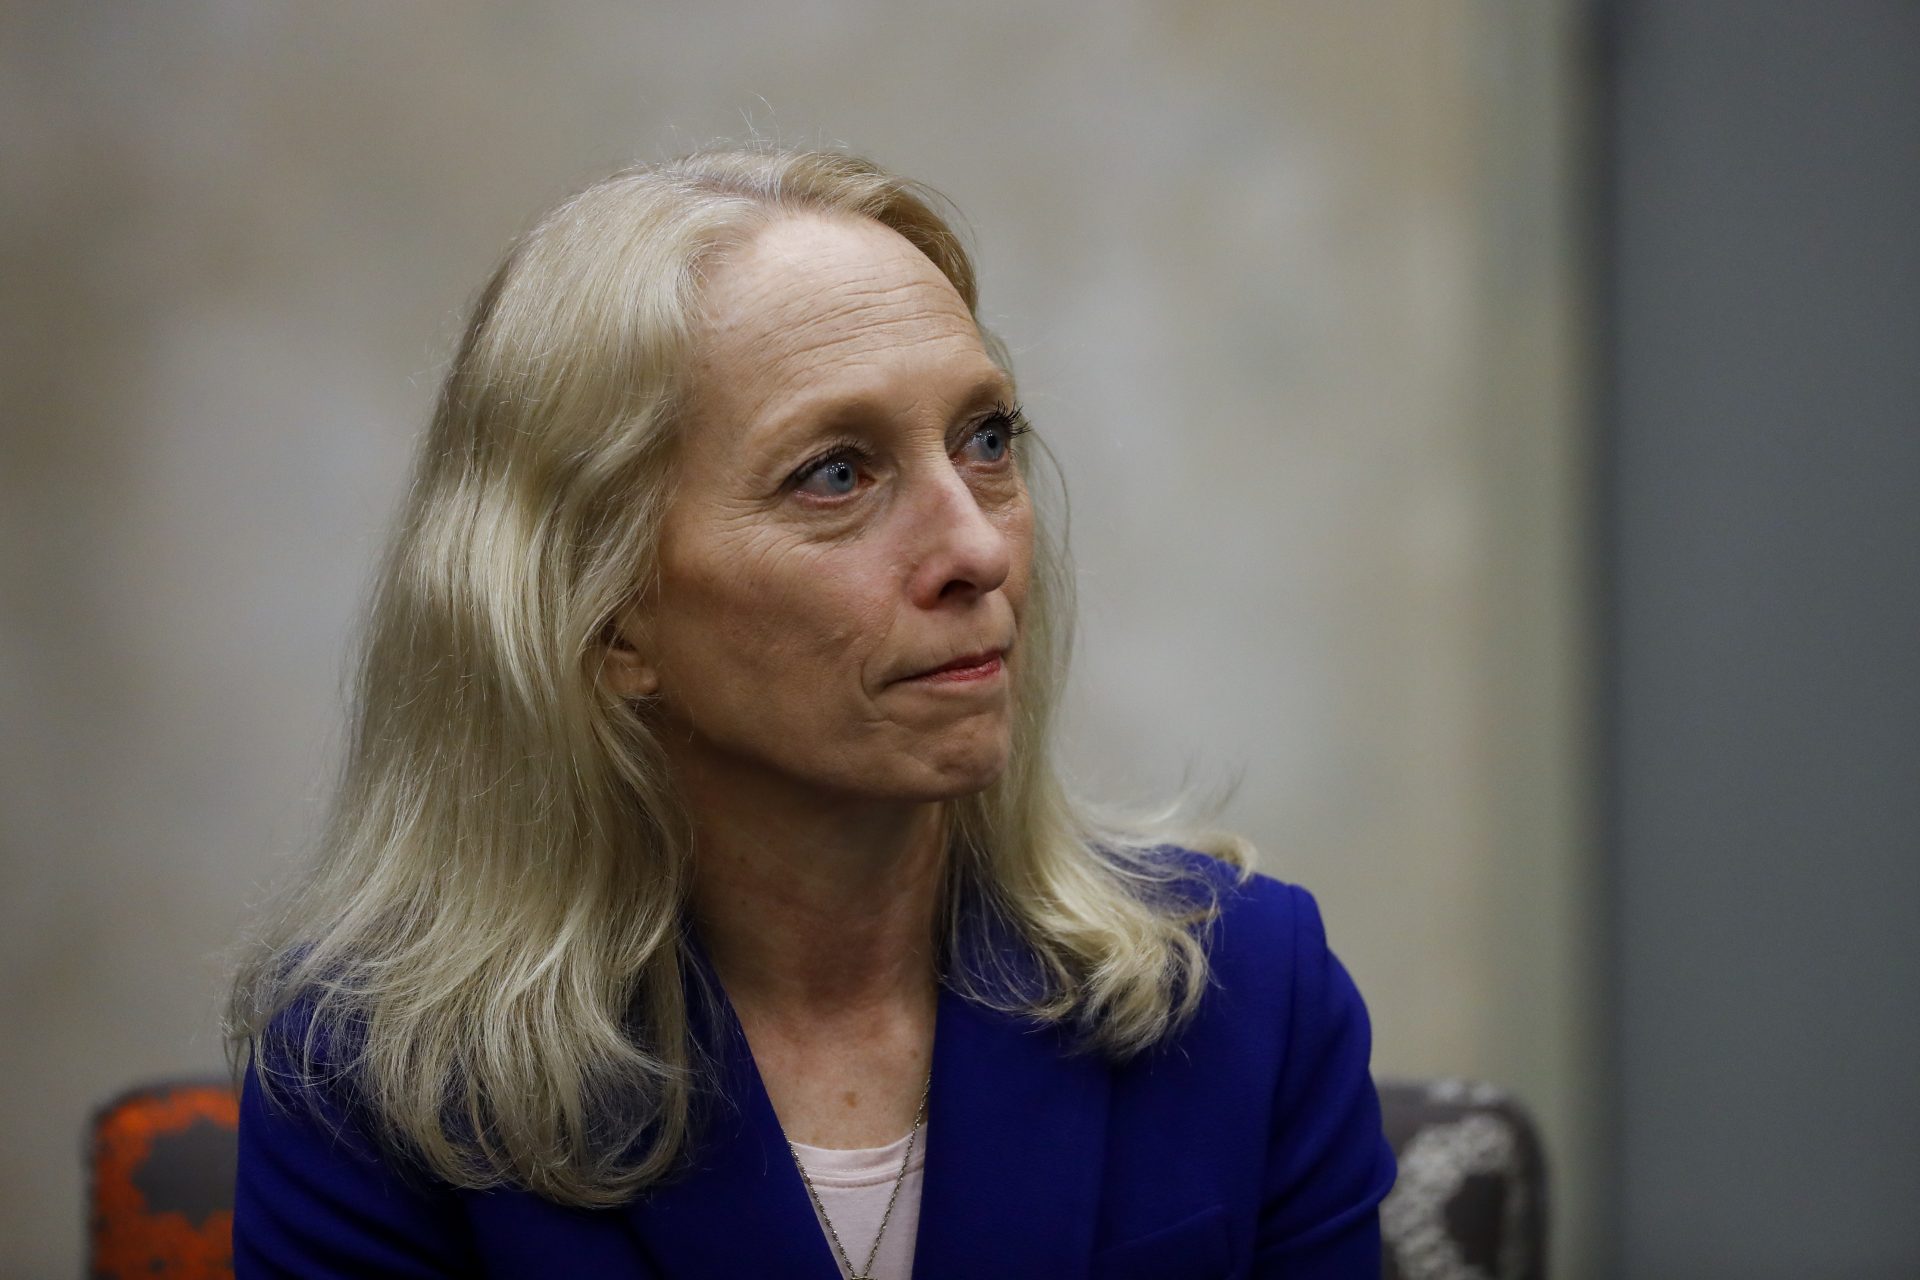 FILE PHOTO: Rep. Mary Gay Scanlon, D-Pa., pauses during a panel discussion at Delaware County Community College, Friday, May 24, 2019, in Media, Pa.